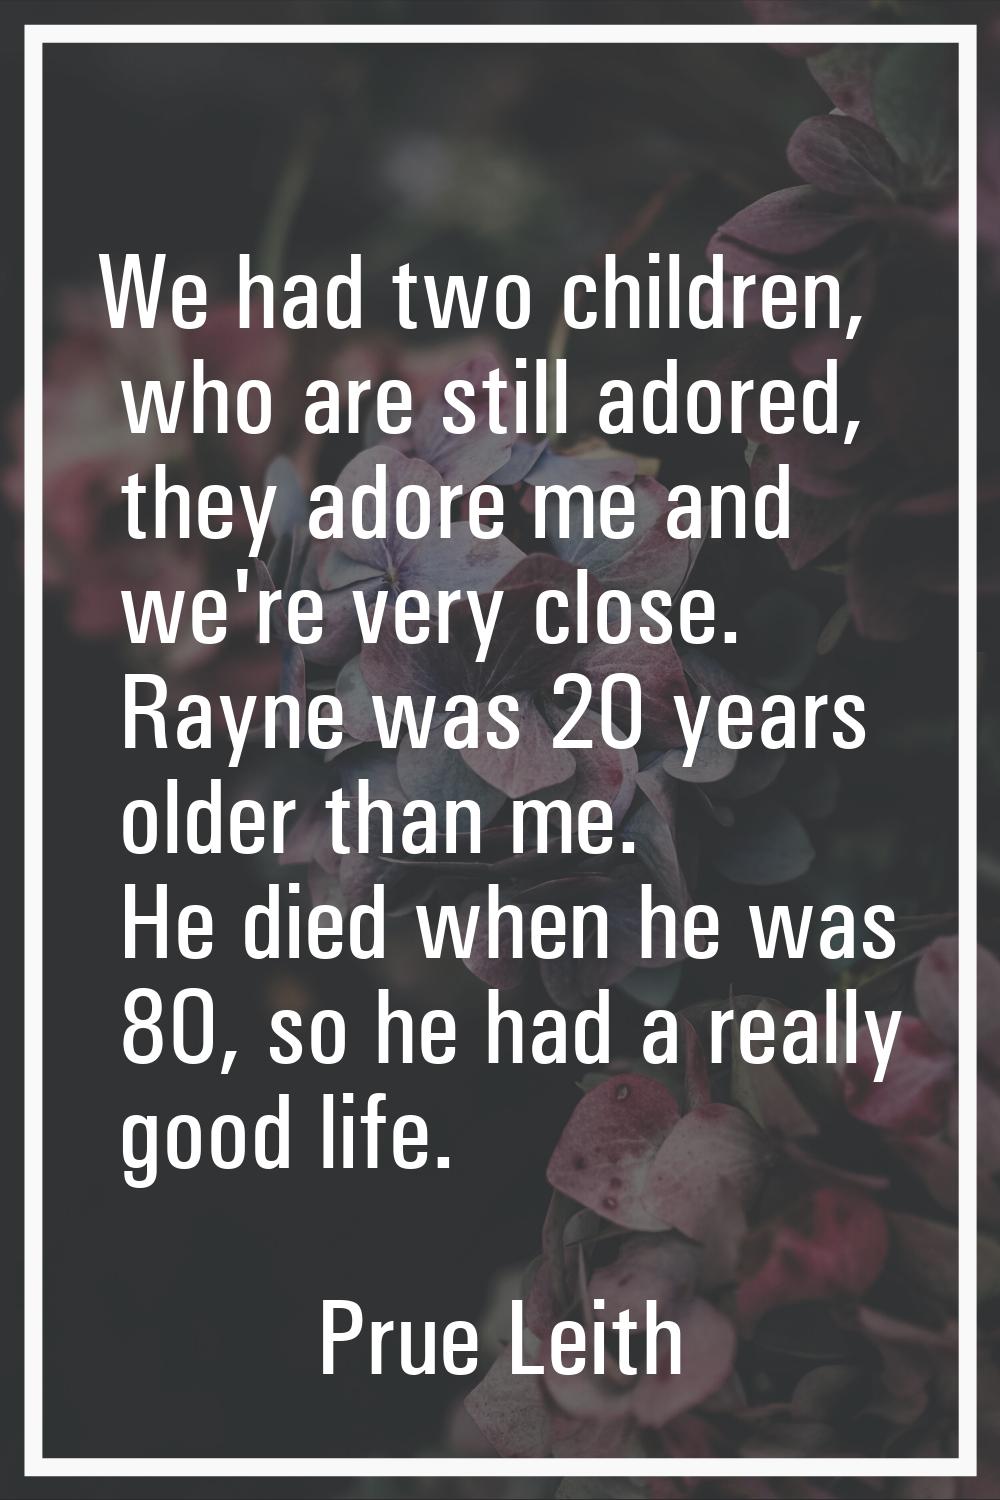 We had two children, who are still adored, they adore me and we're very close. Rayne was 20 years o